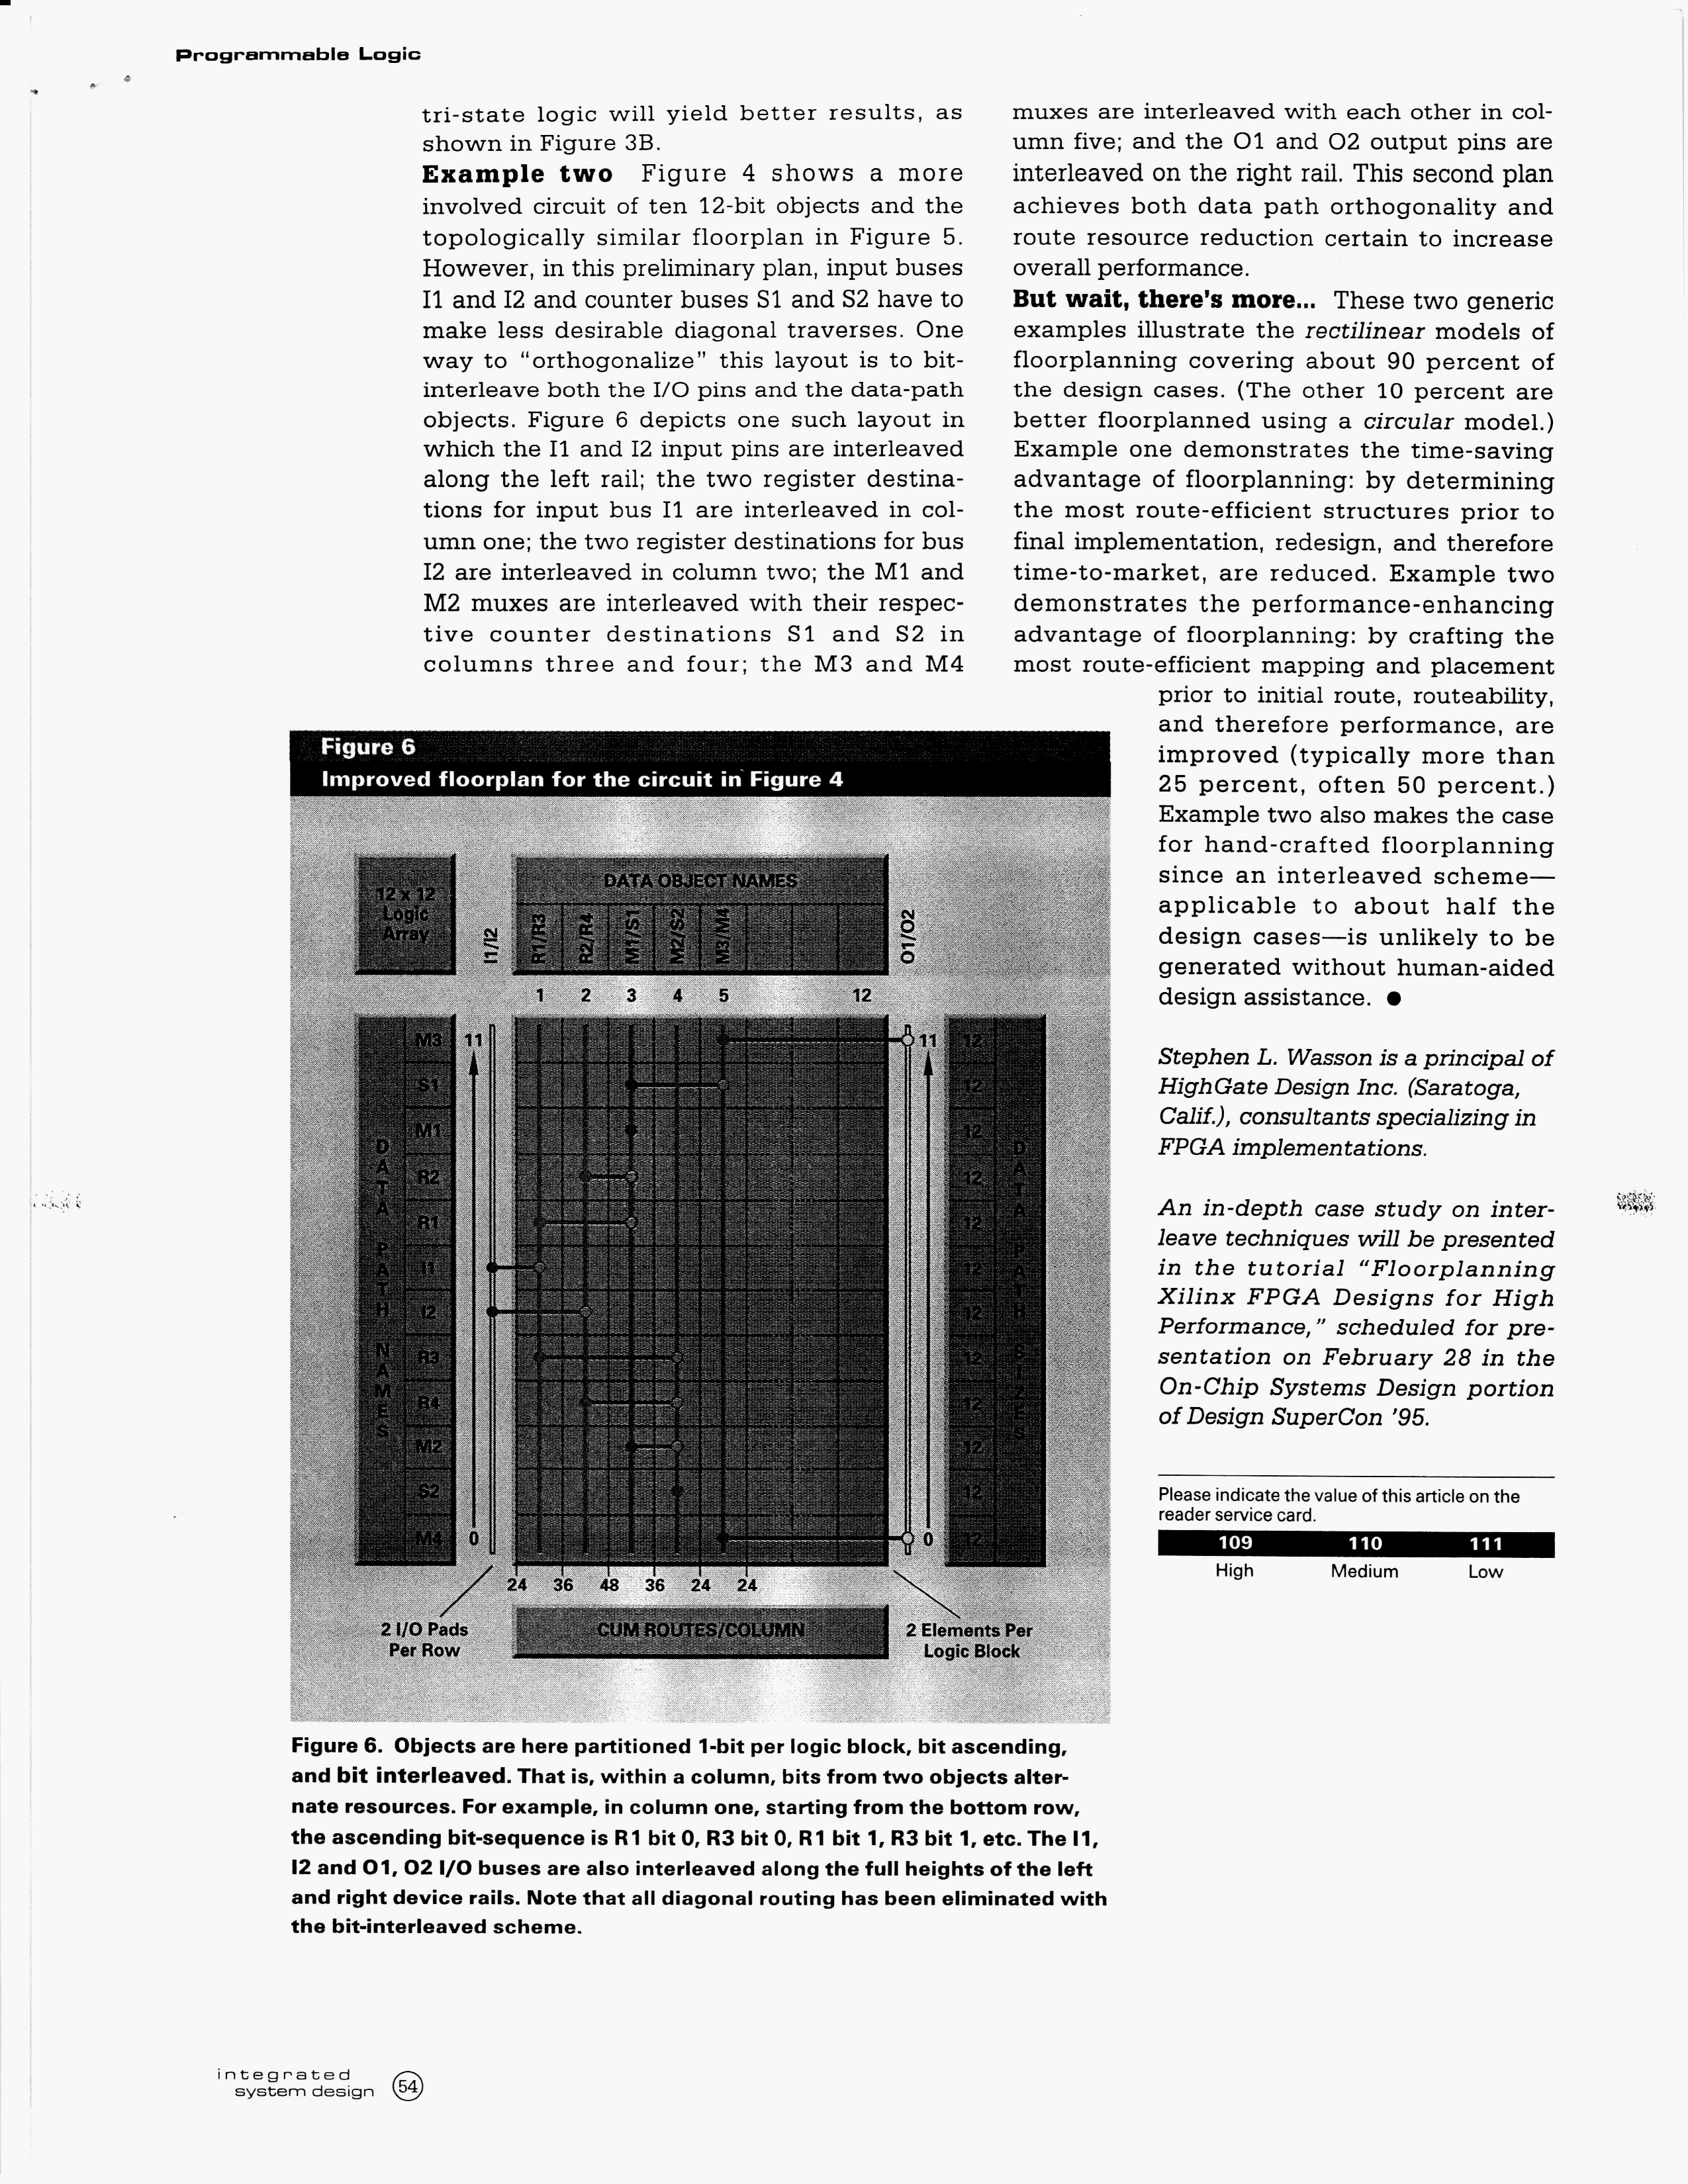 * Floorplanning for High-Performance FPGA Designs, Stephen Wasson, March 1995, Integrated System Design page 5 *